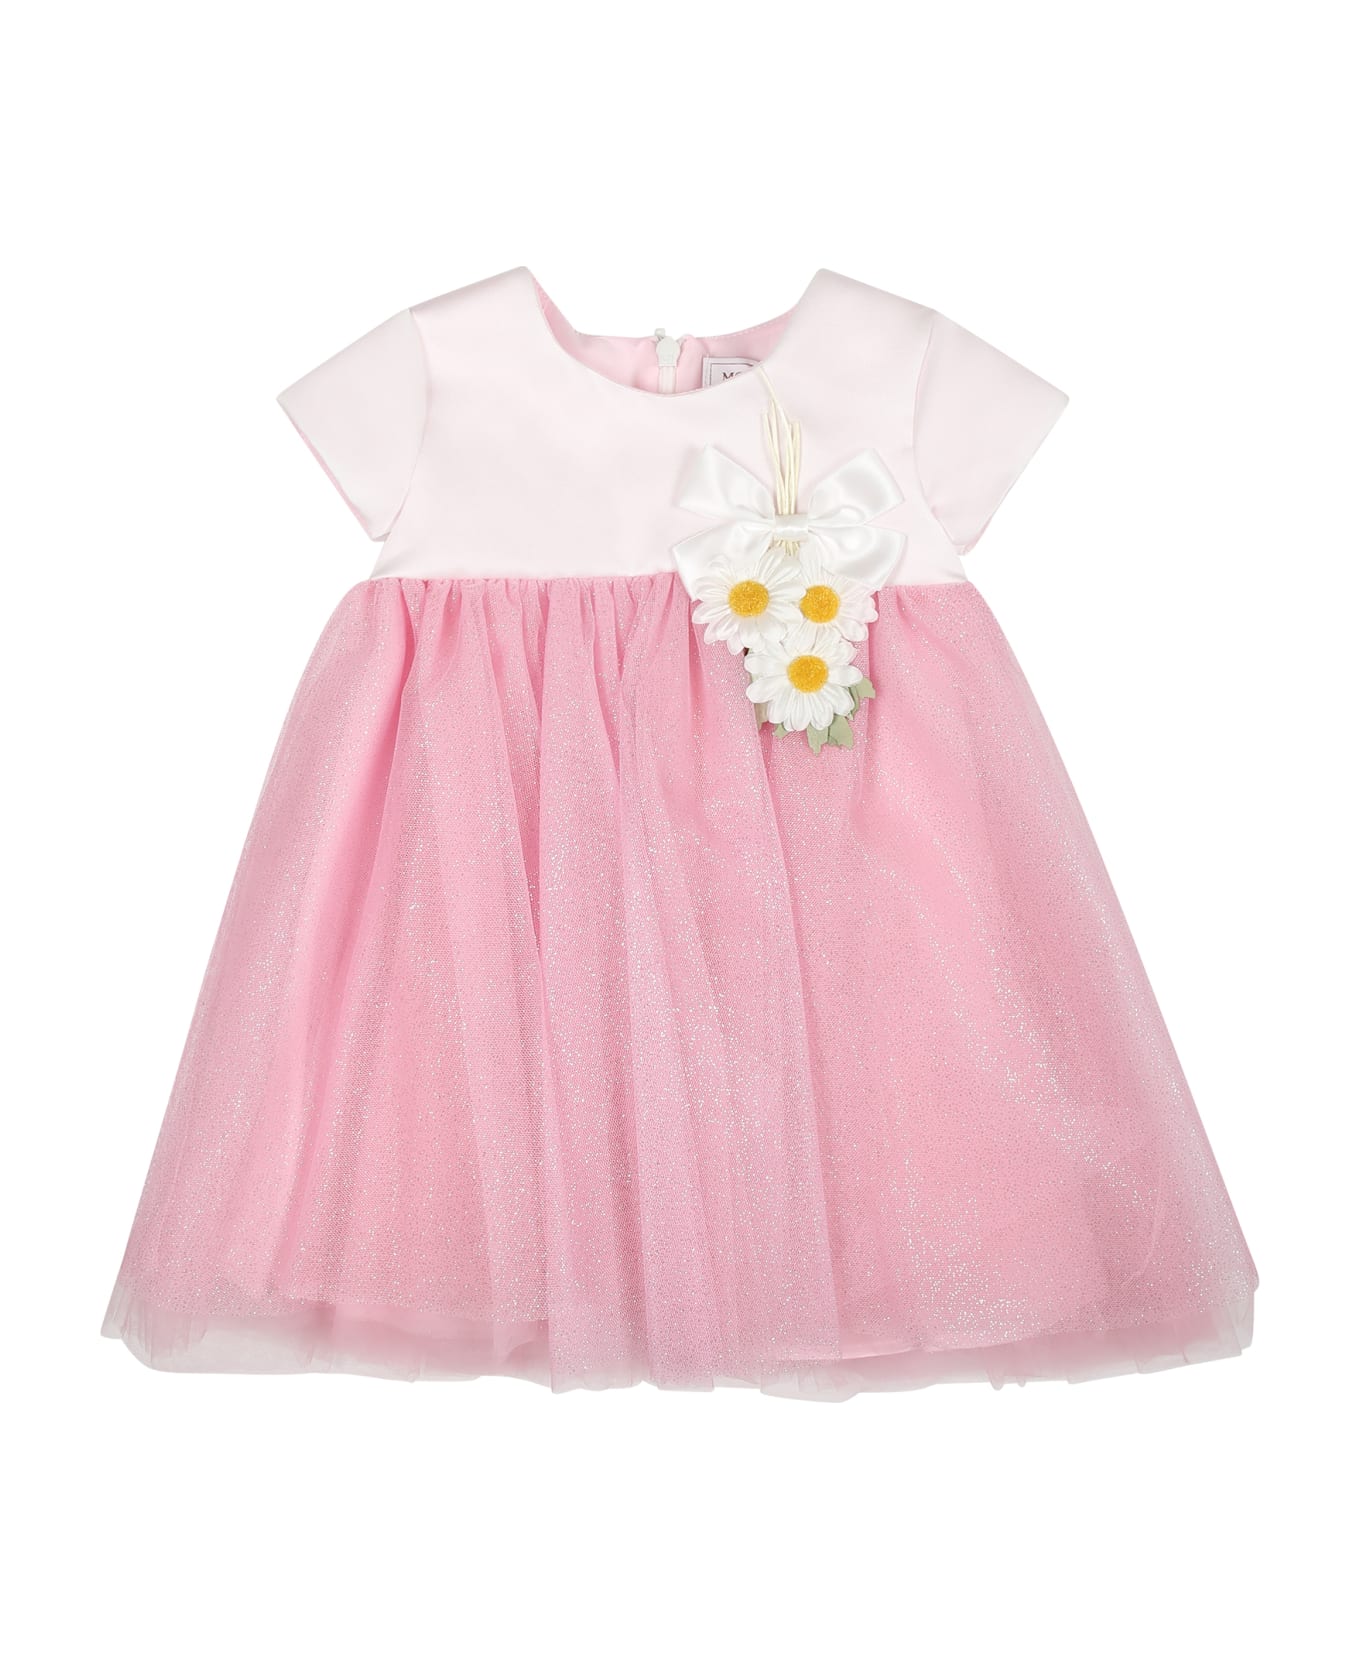 Monnalisa Pink Dress For Baby Girl With Daisies And Lurex - Pink ウェア